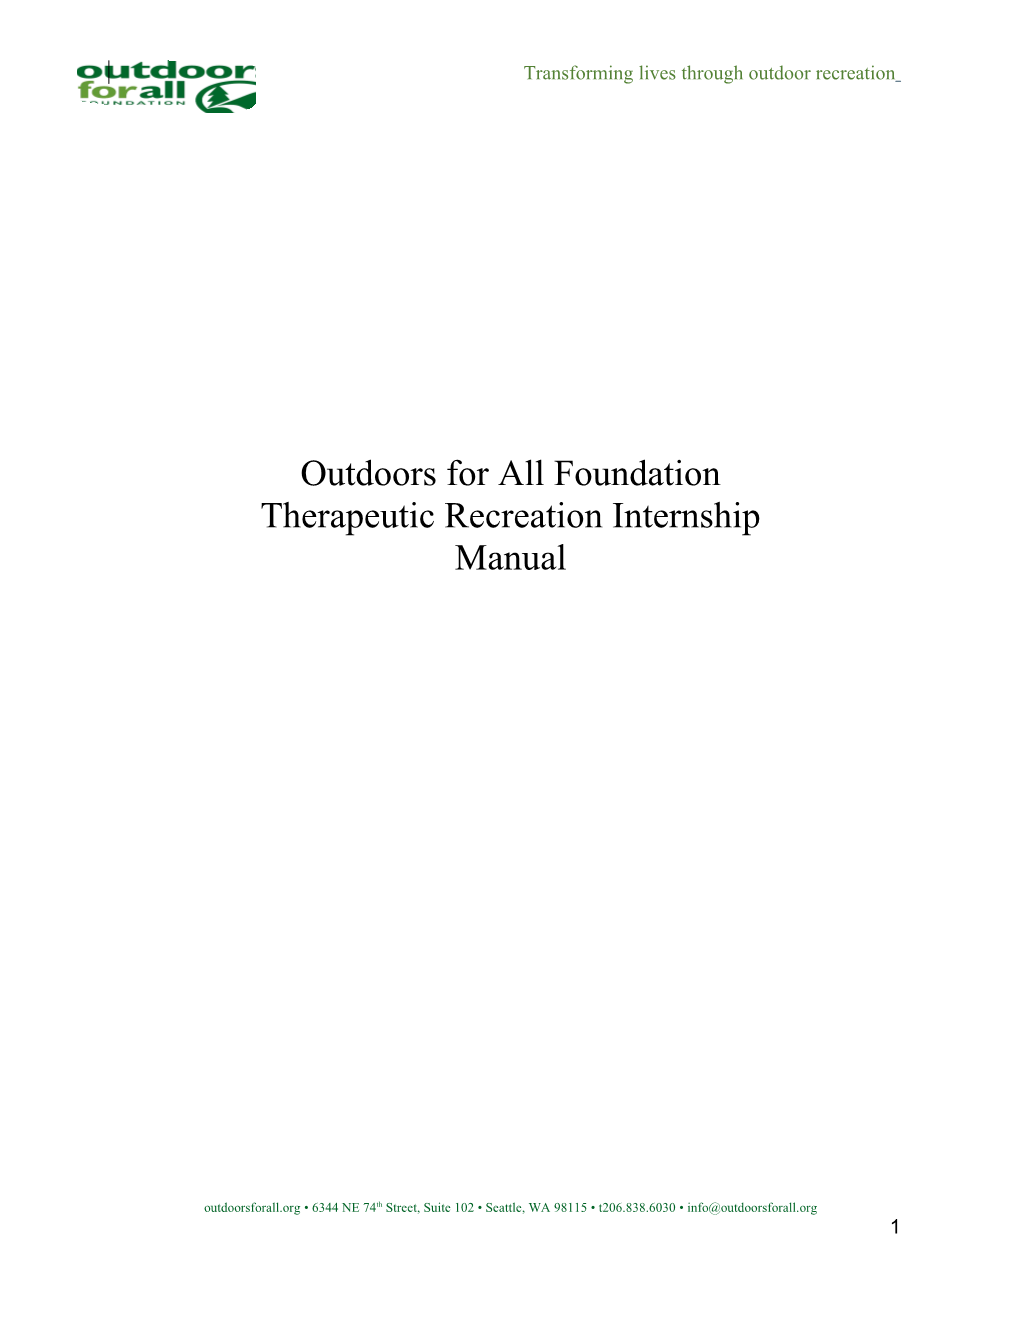 Outdoors for All Foundation